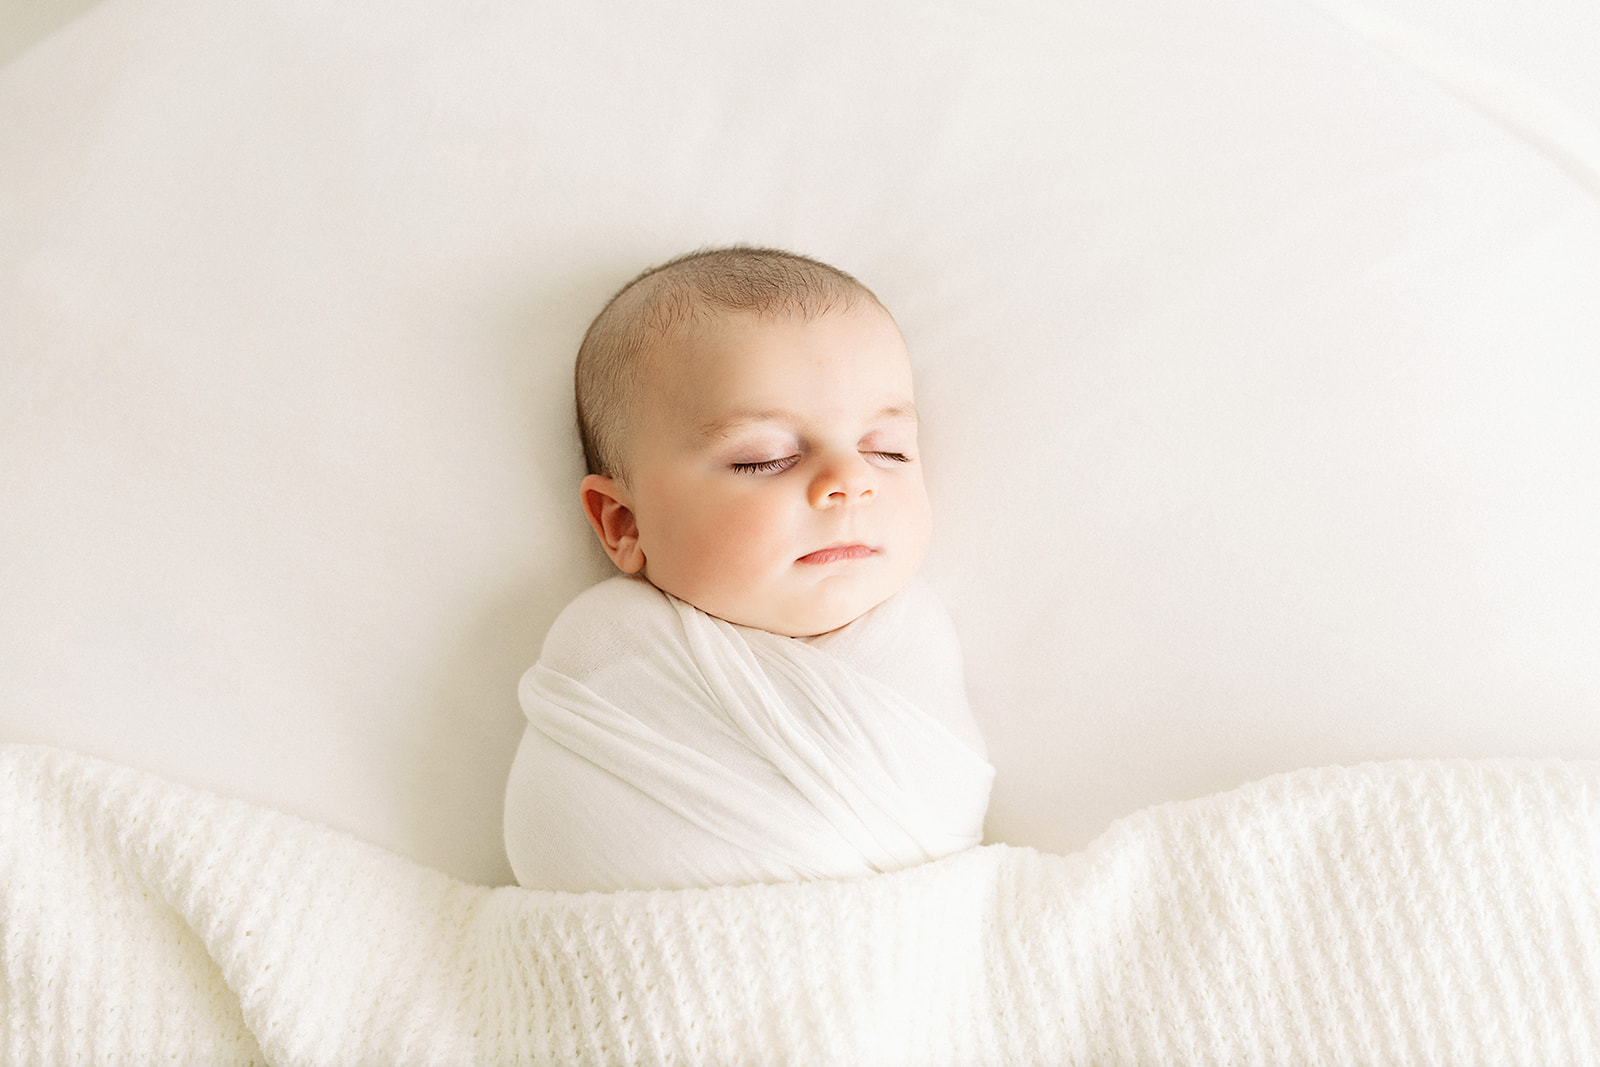 A newborn baby sleeps by a window in a studio wrapped tightly in a white swaddle thanks to baby sleep consultant pittsburgh